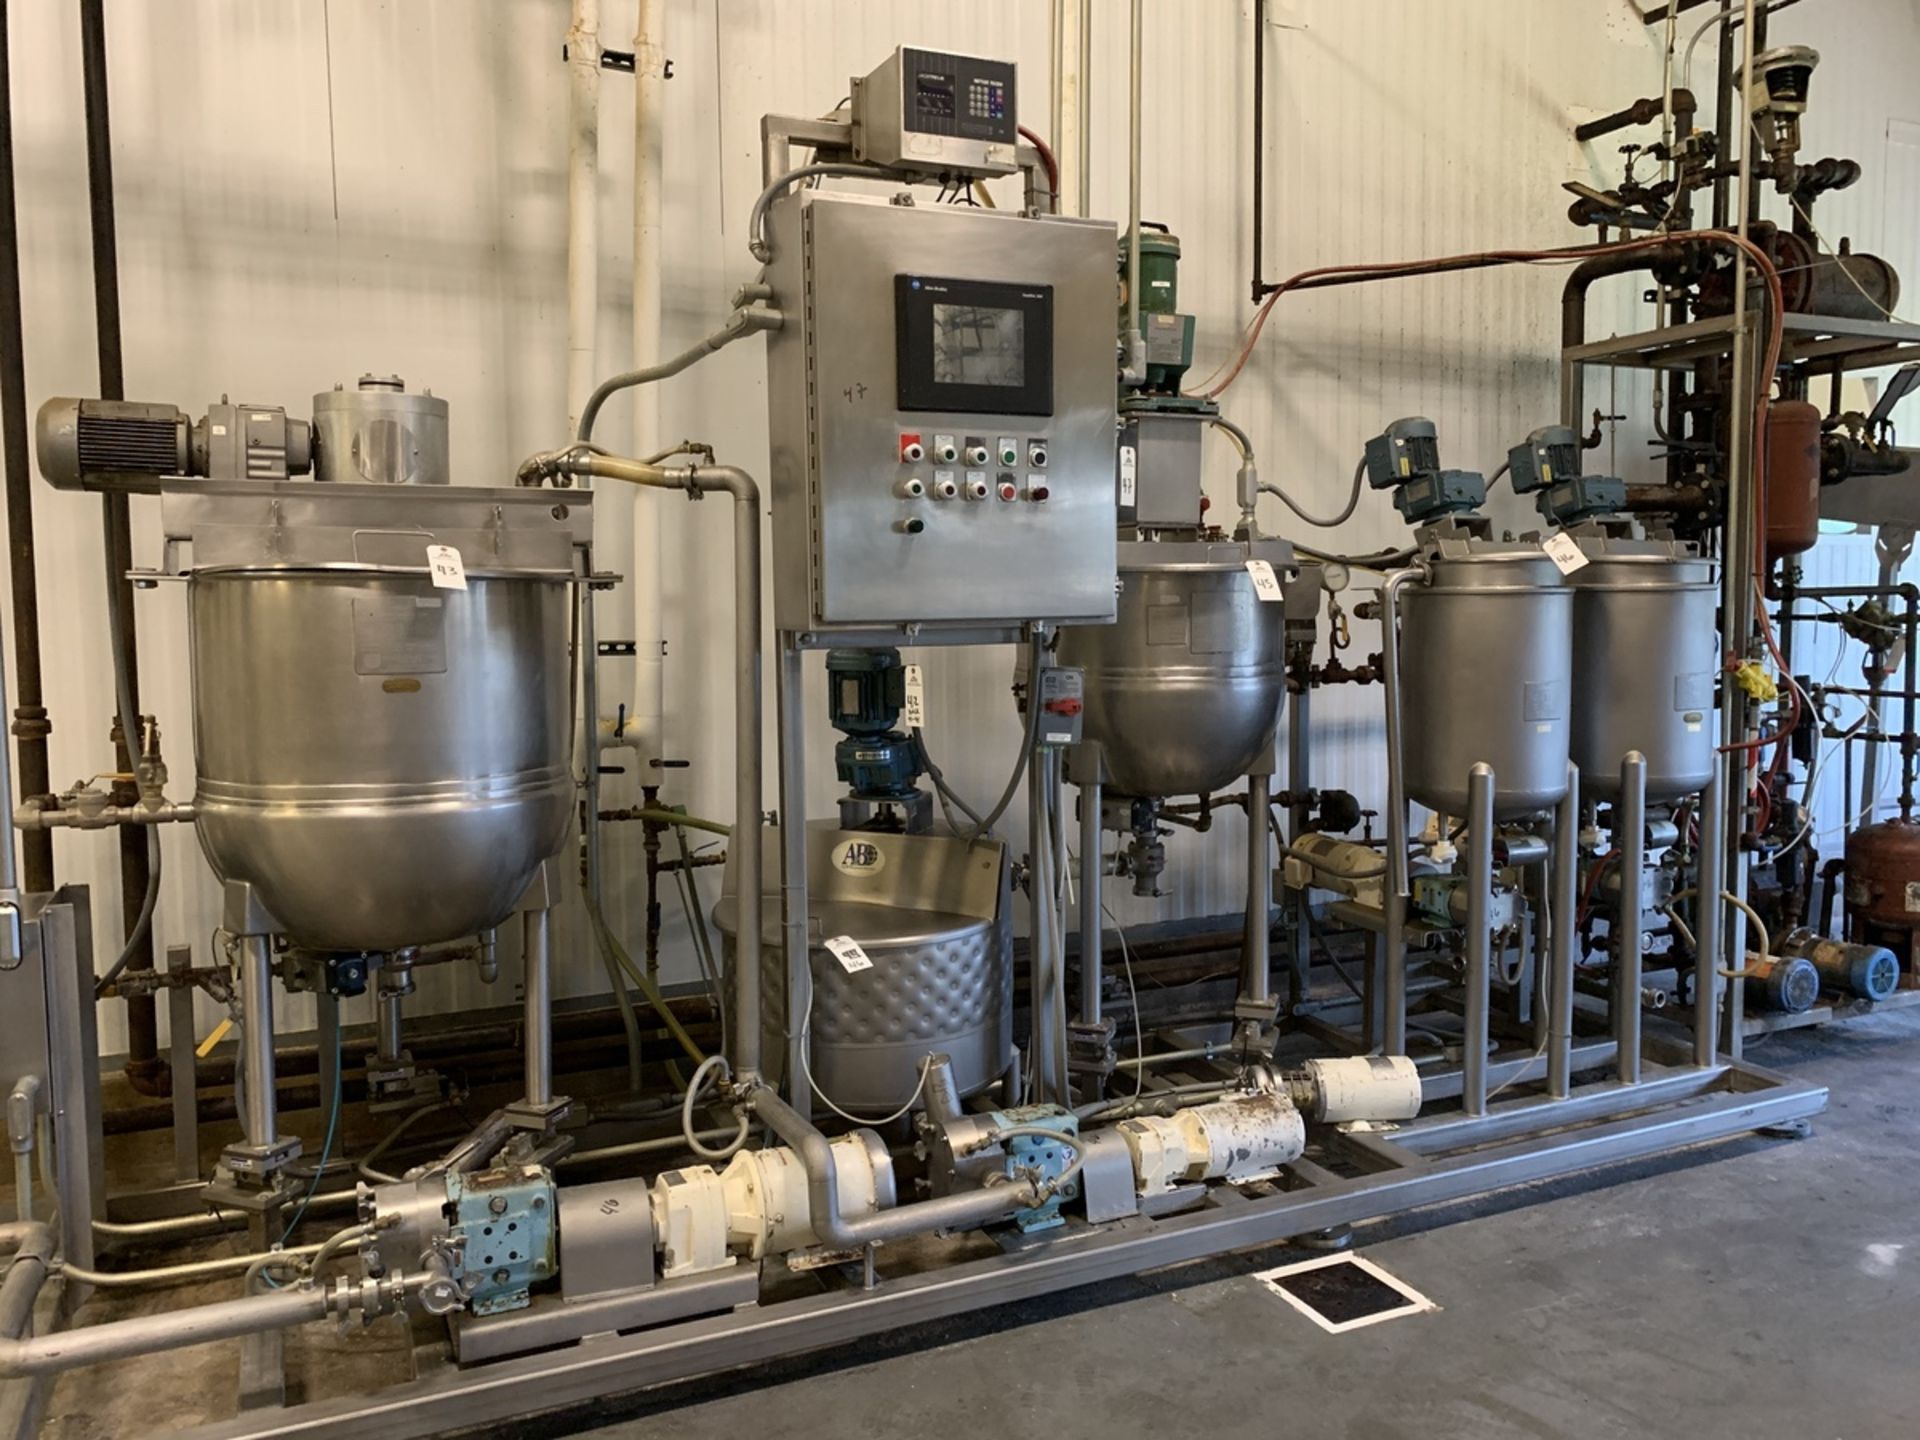 Bulk Bid Kettle Blending Skid Lot 43-48 | Subject to Piecemeal | Rig Fee: 400 Loaded Out As a Skid